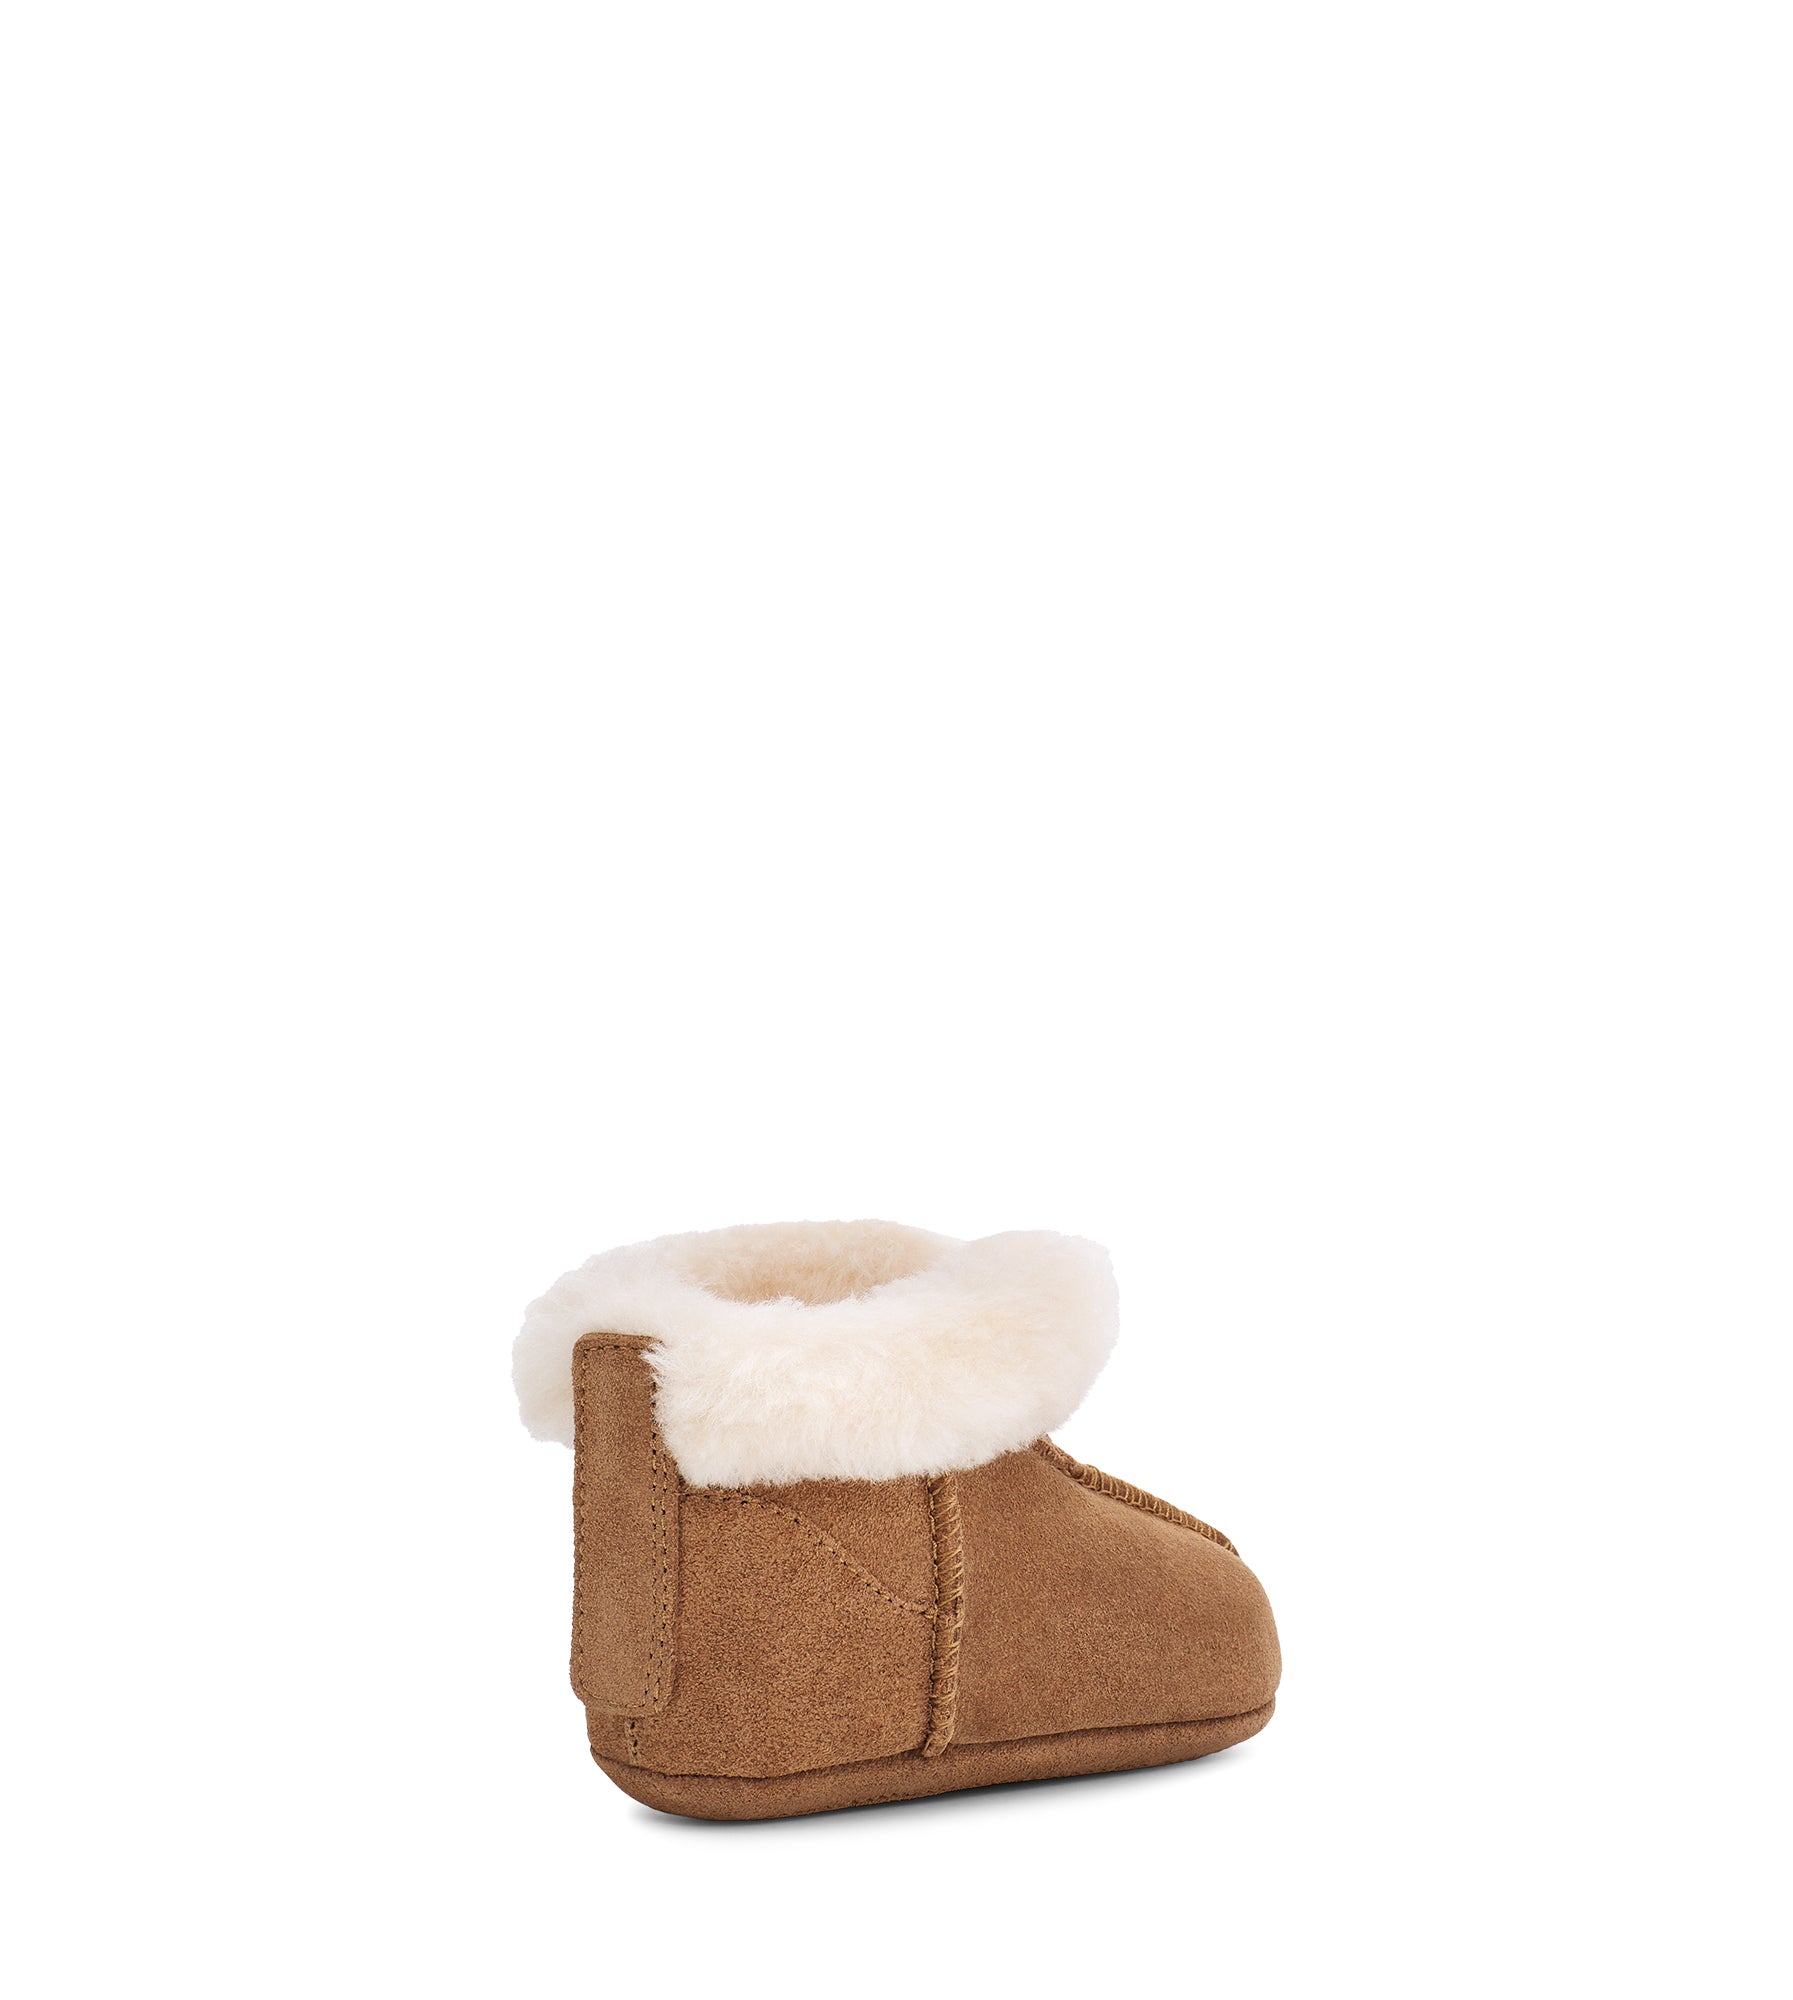 Infant's Gojee Suede